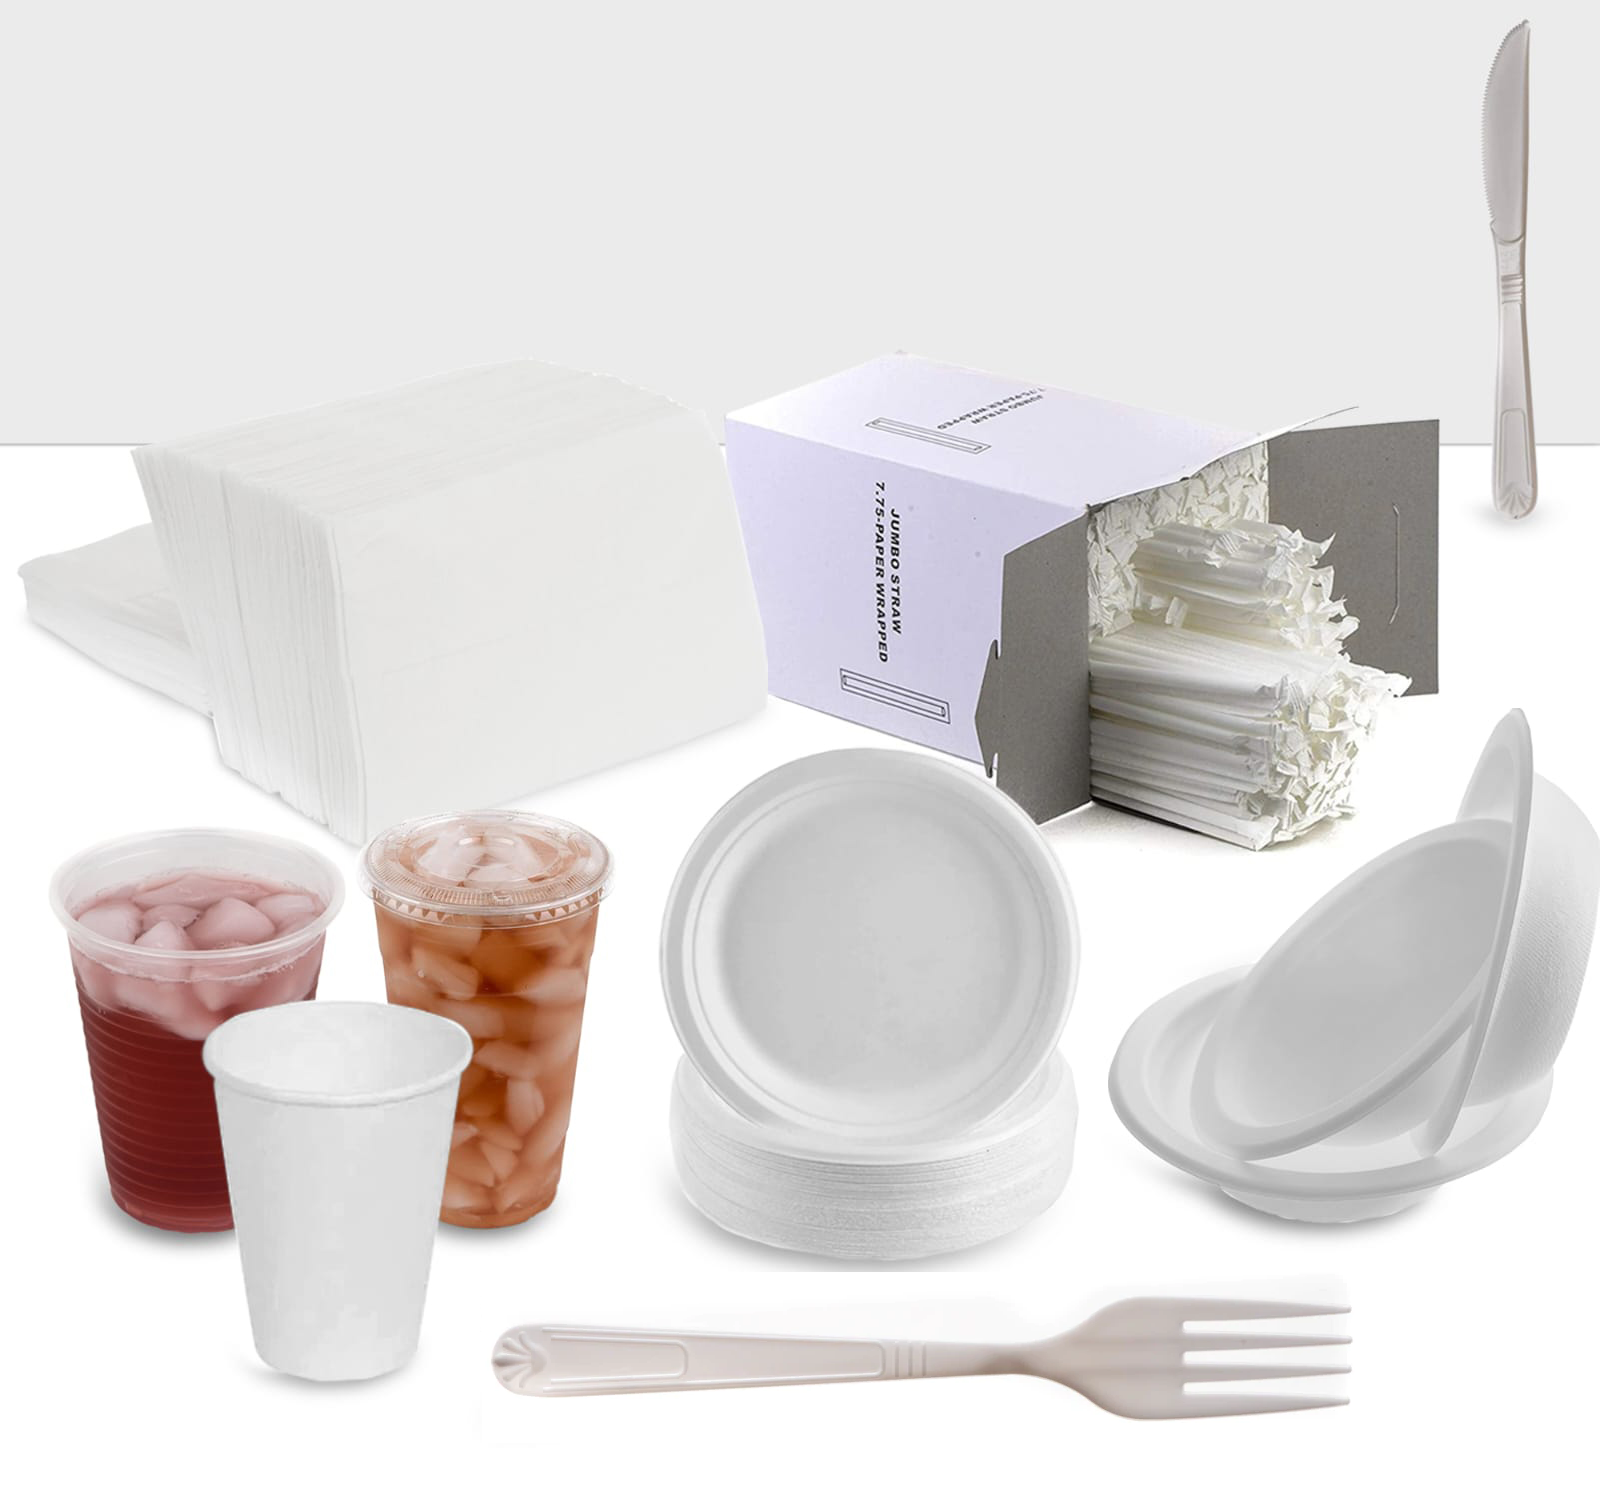 Essential Care Package - Household Kit for 50 Guests or more! (Bowls, Cutlery, Cups, Napkins, plates, garbage bags)